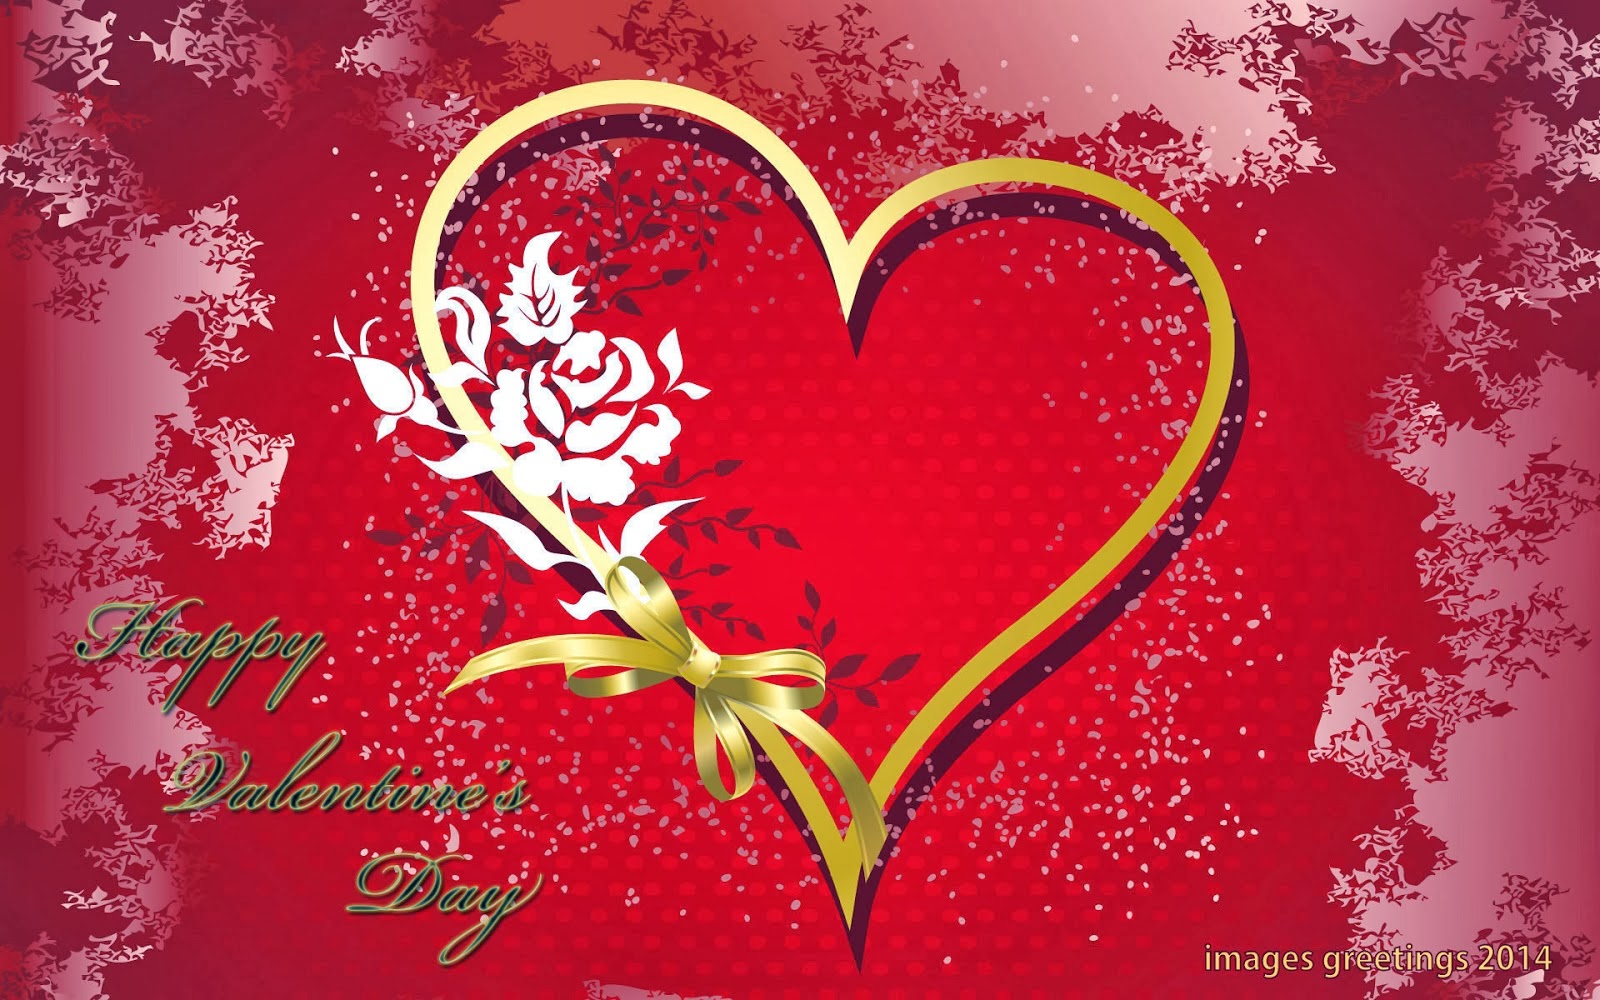 Happy Valentine's Day 2014 Messages For Facebook Status